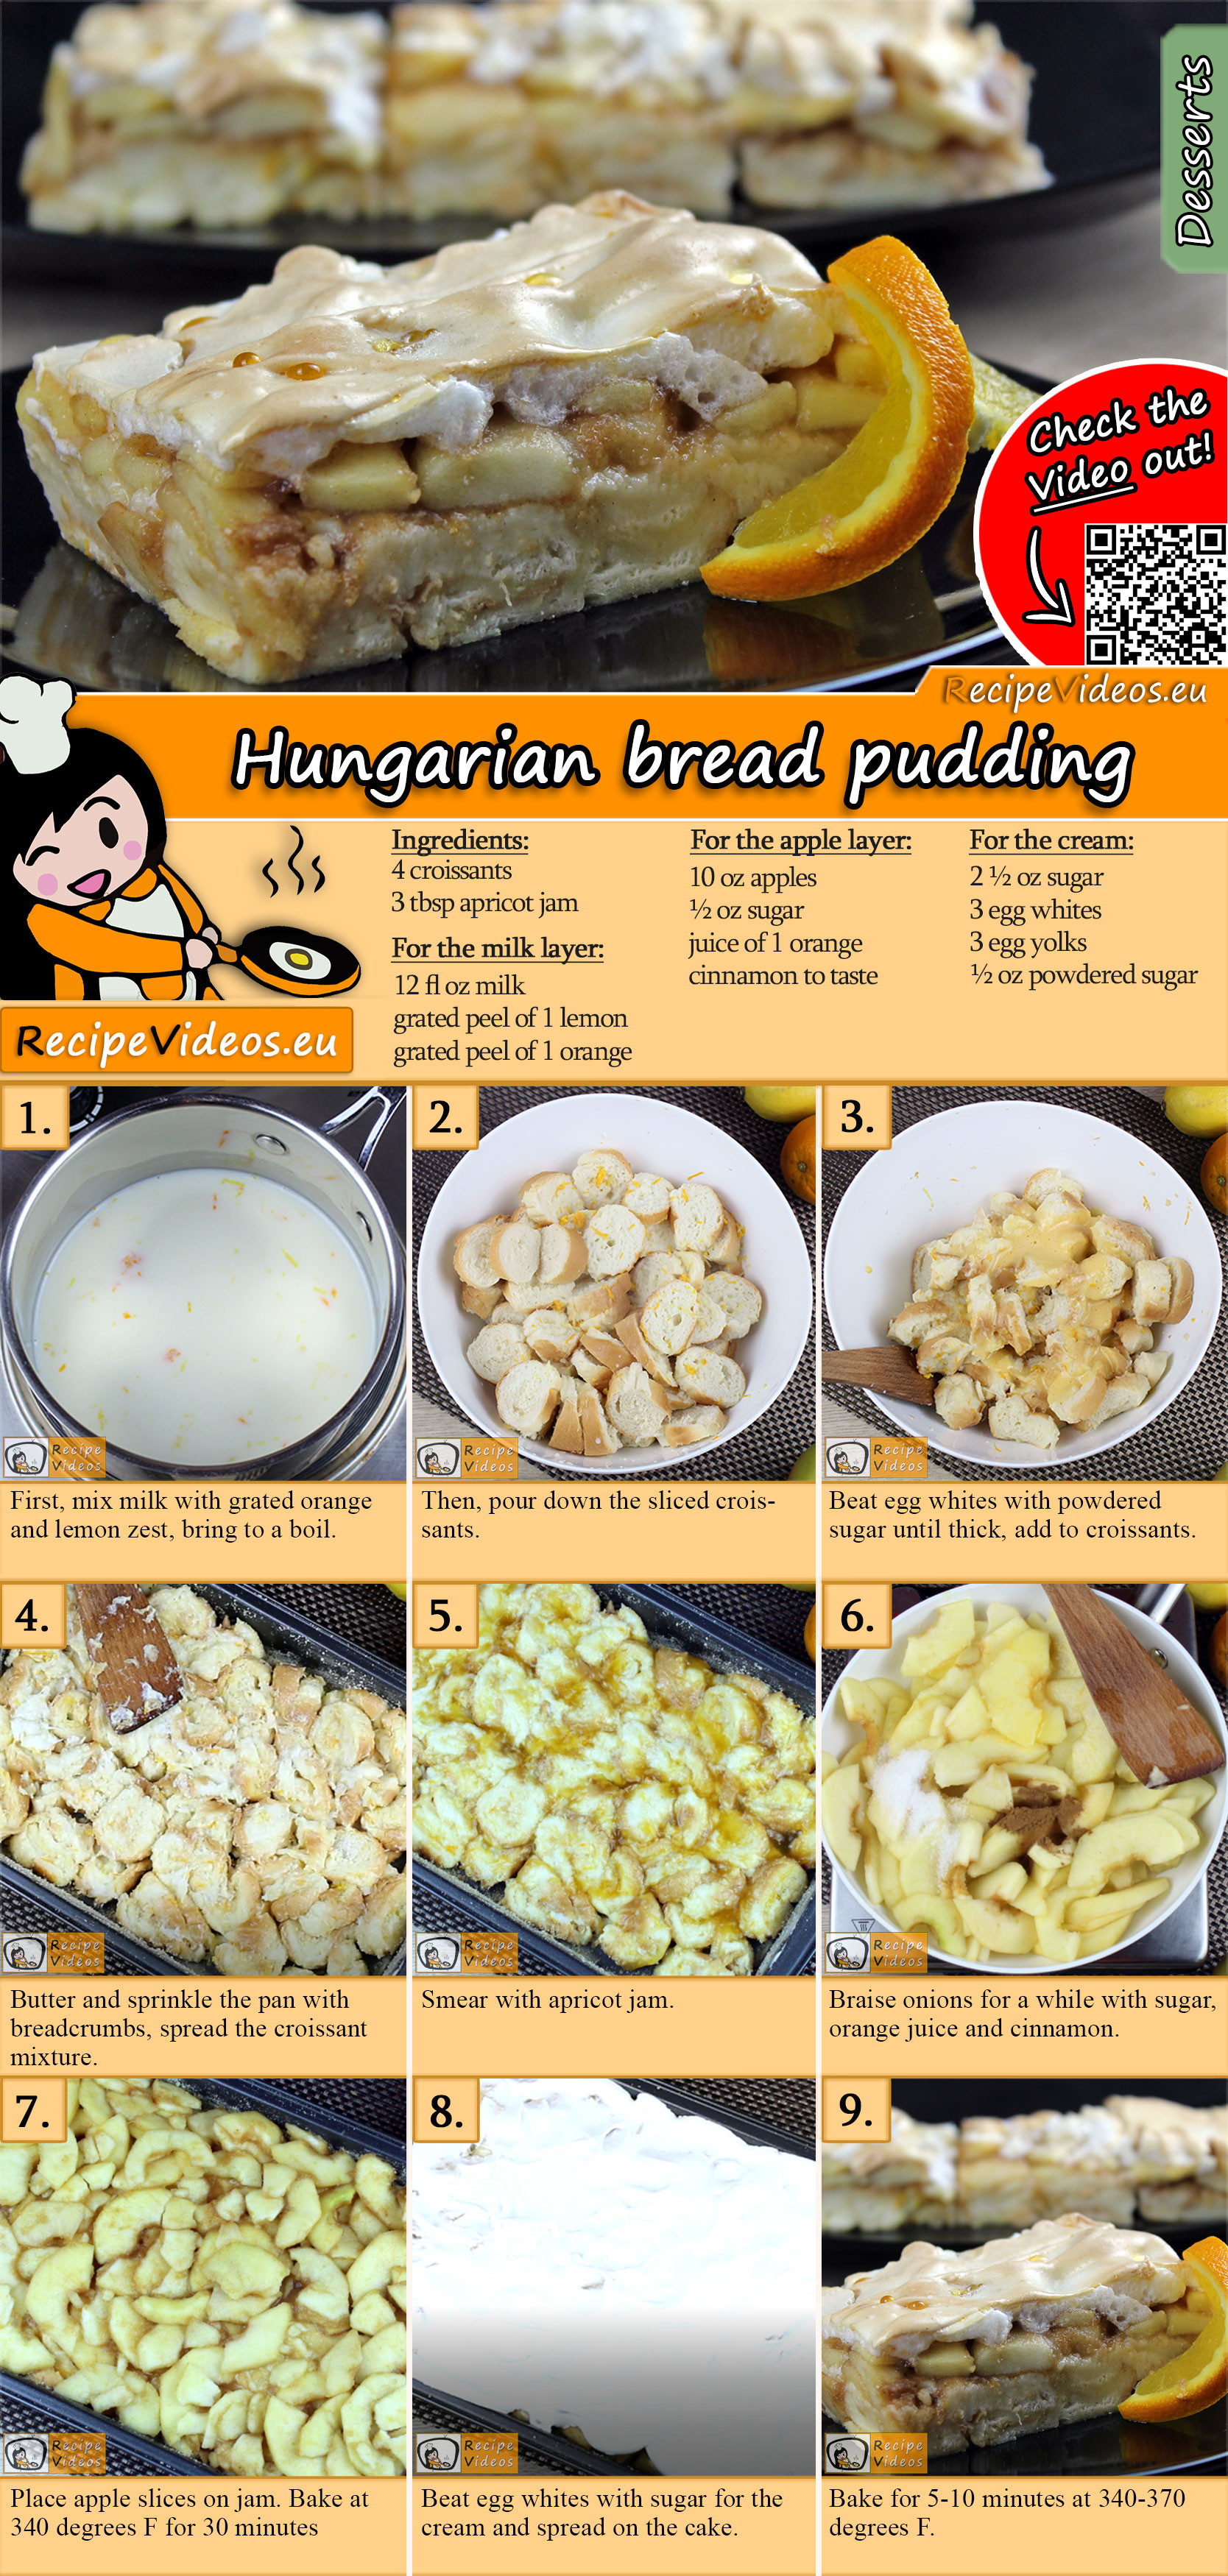 Hungarian bread pudding recipe with video